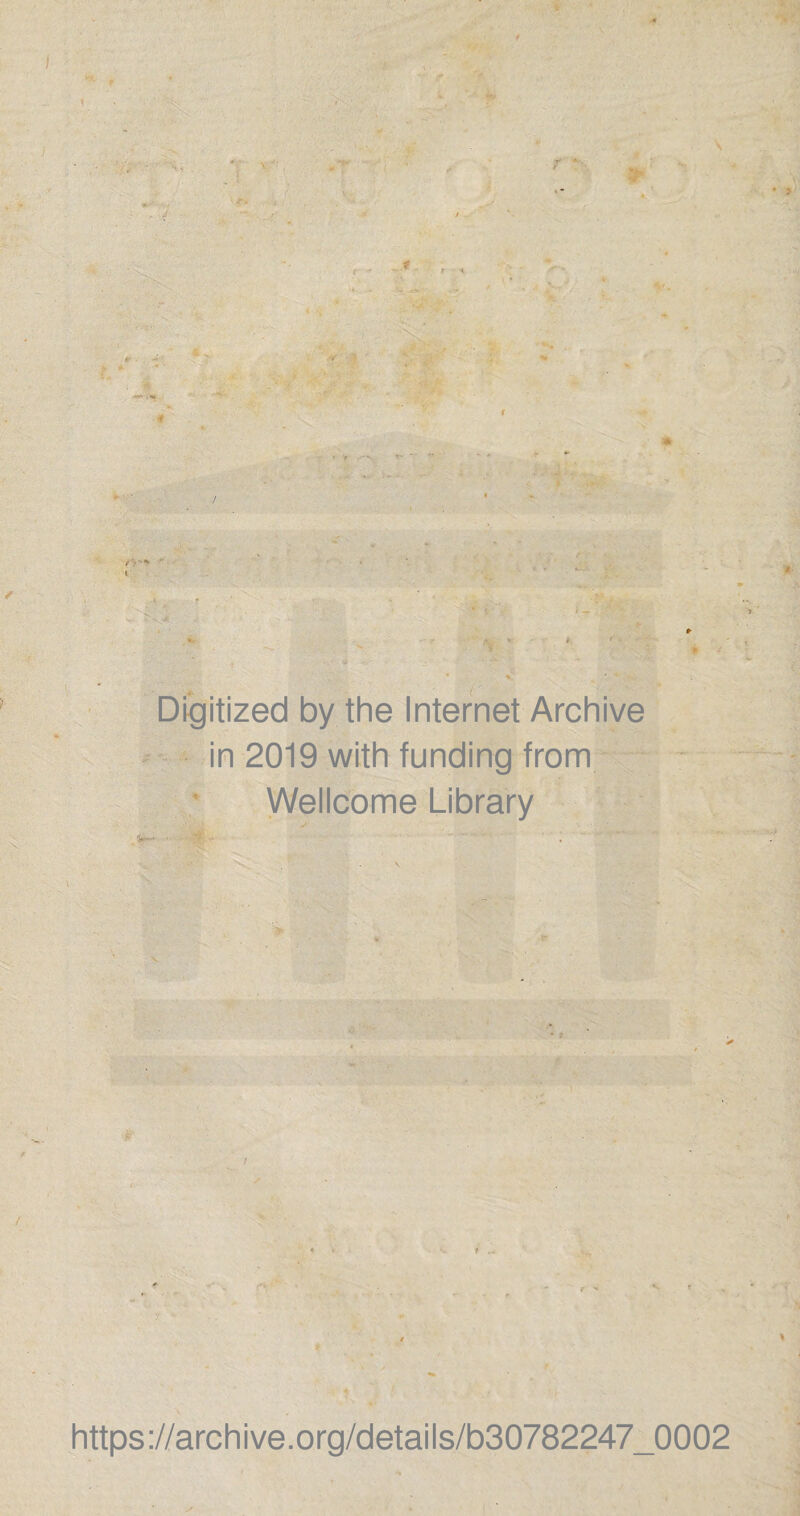 Digitized by the Internet Archive in 2019 with funding from Wellcome Library https://archive.org/details/b30782247_0002